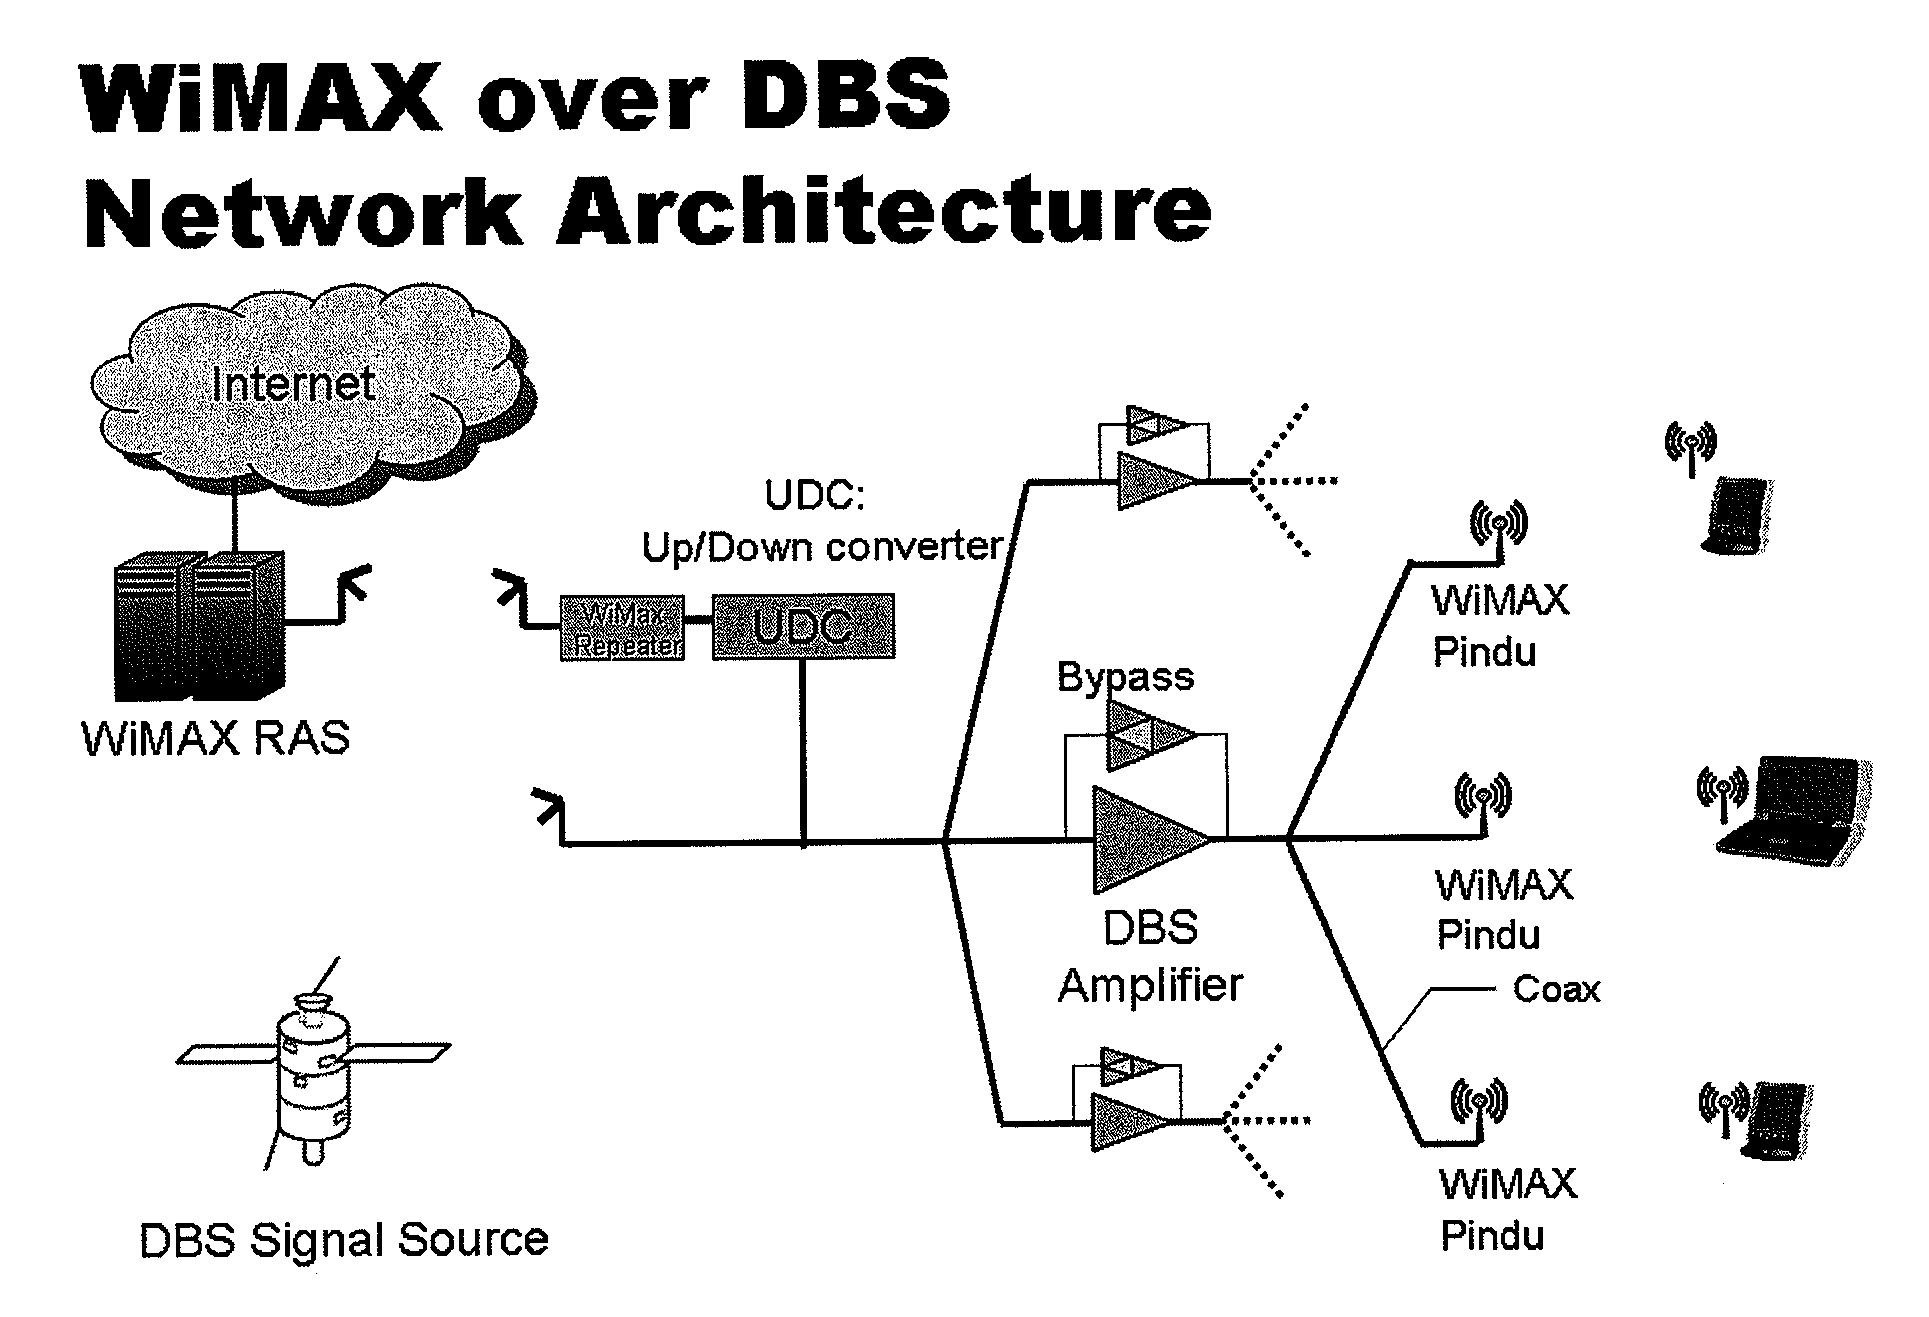 Method and apparatus for providing wimax over catv, dbs, PON infrastructure